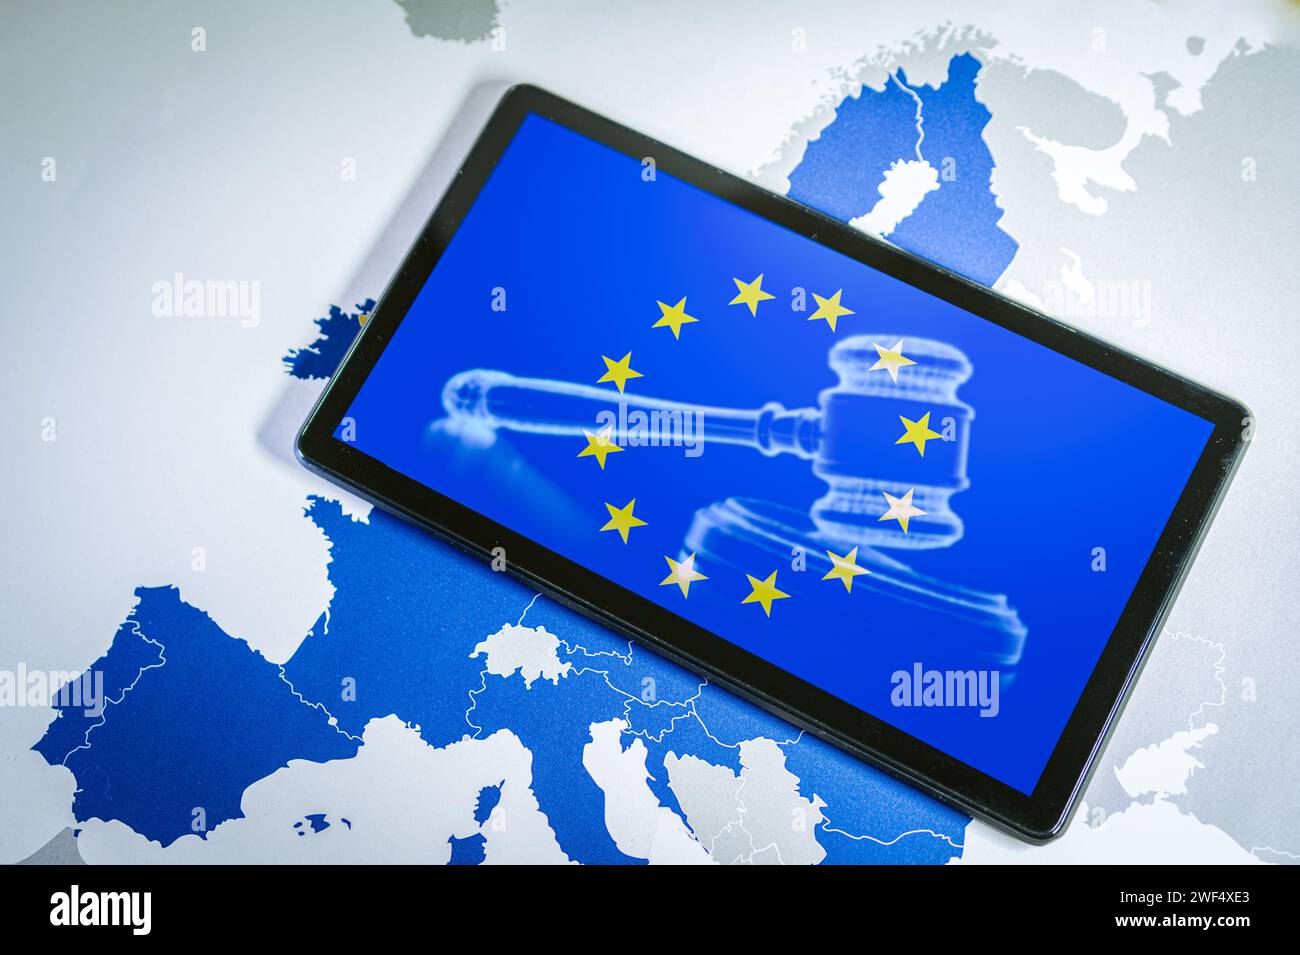 EU Flag with gavel and sound block on smartphone screen over a Eu map. Stock Photo